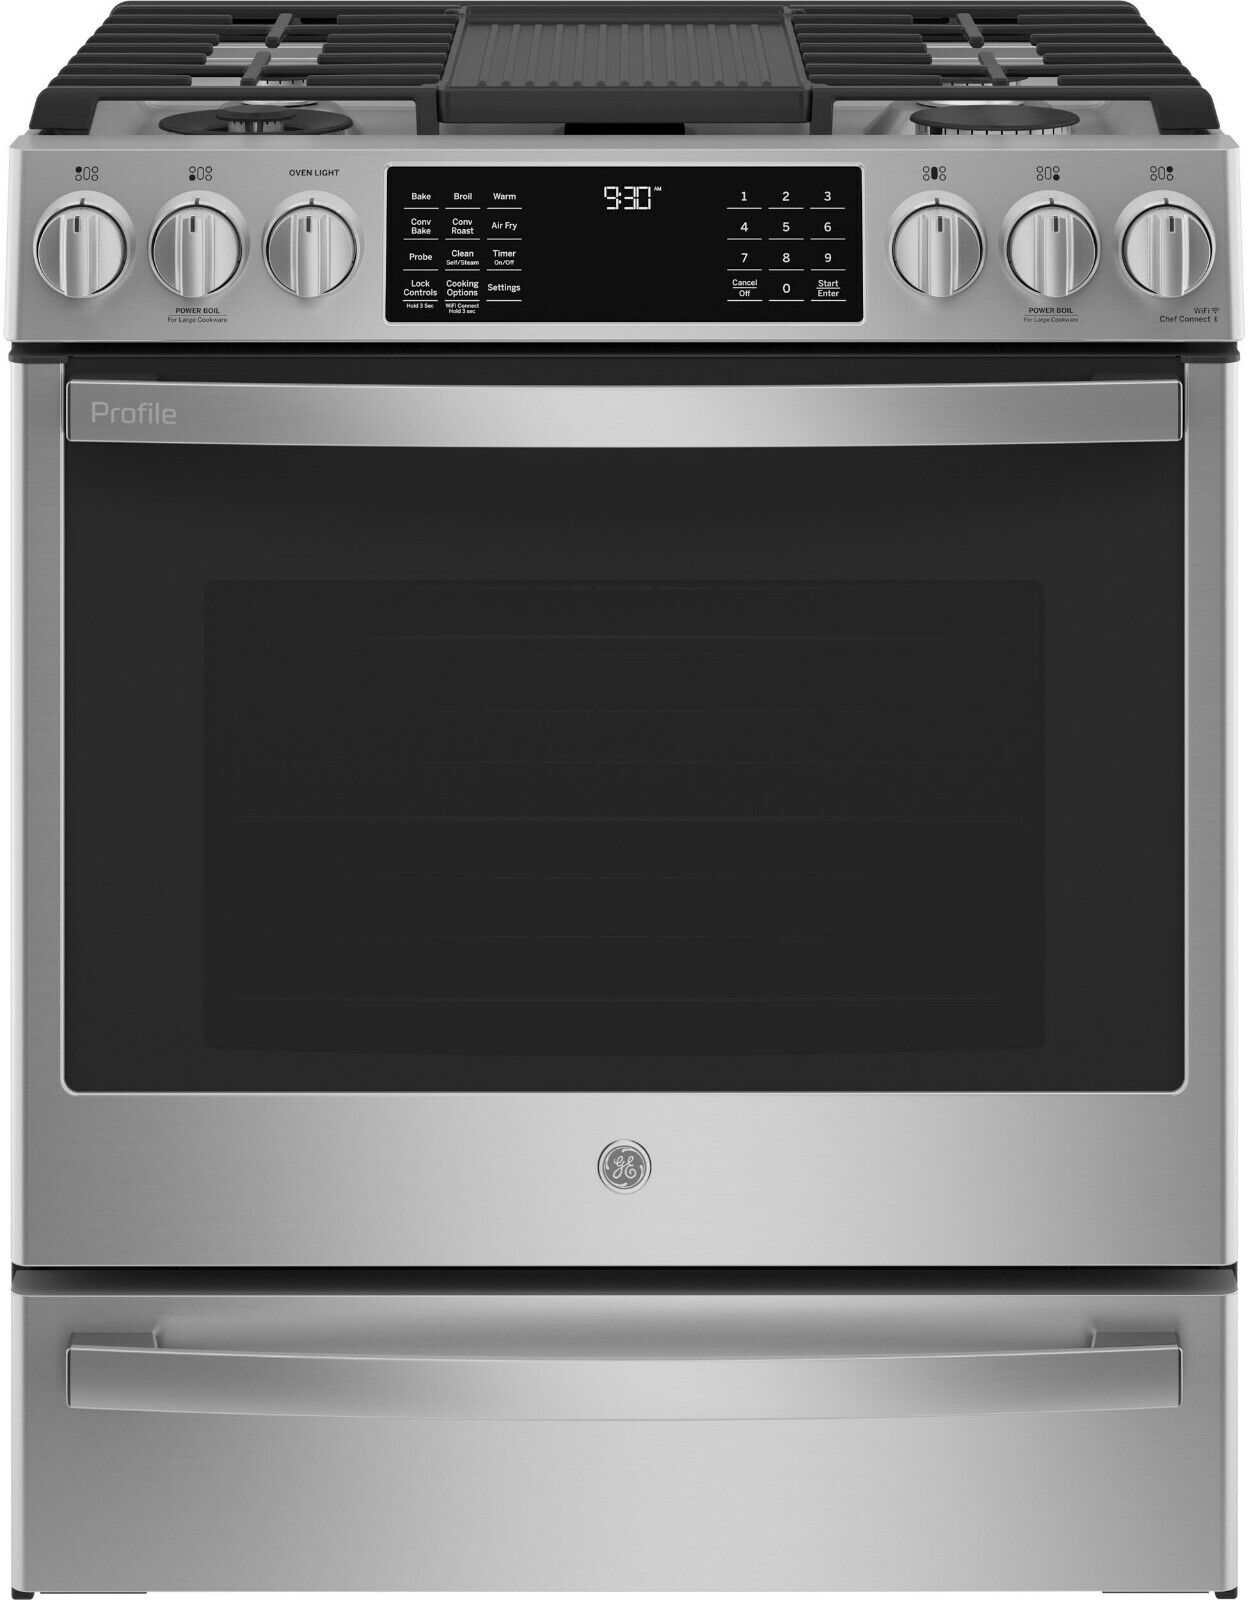 GE Profile P2S930YPFS 30 Inch Dual Fuel Smart Range In Stainless Steel.